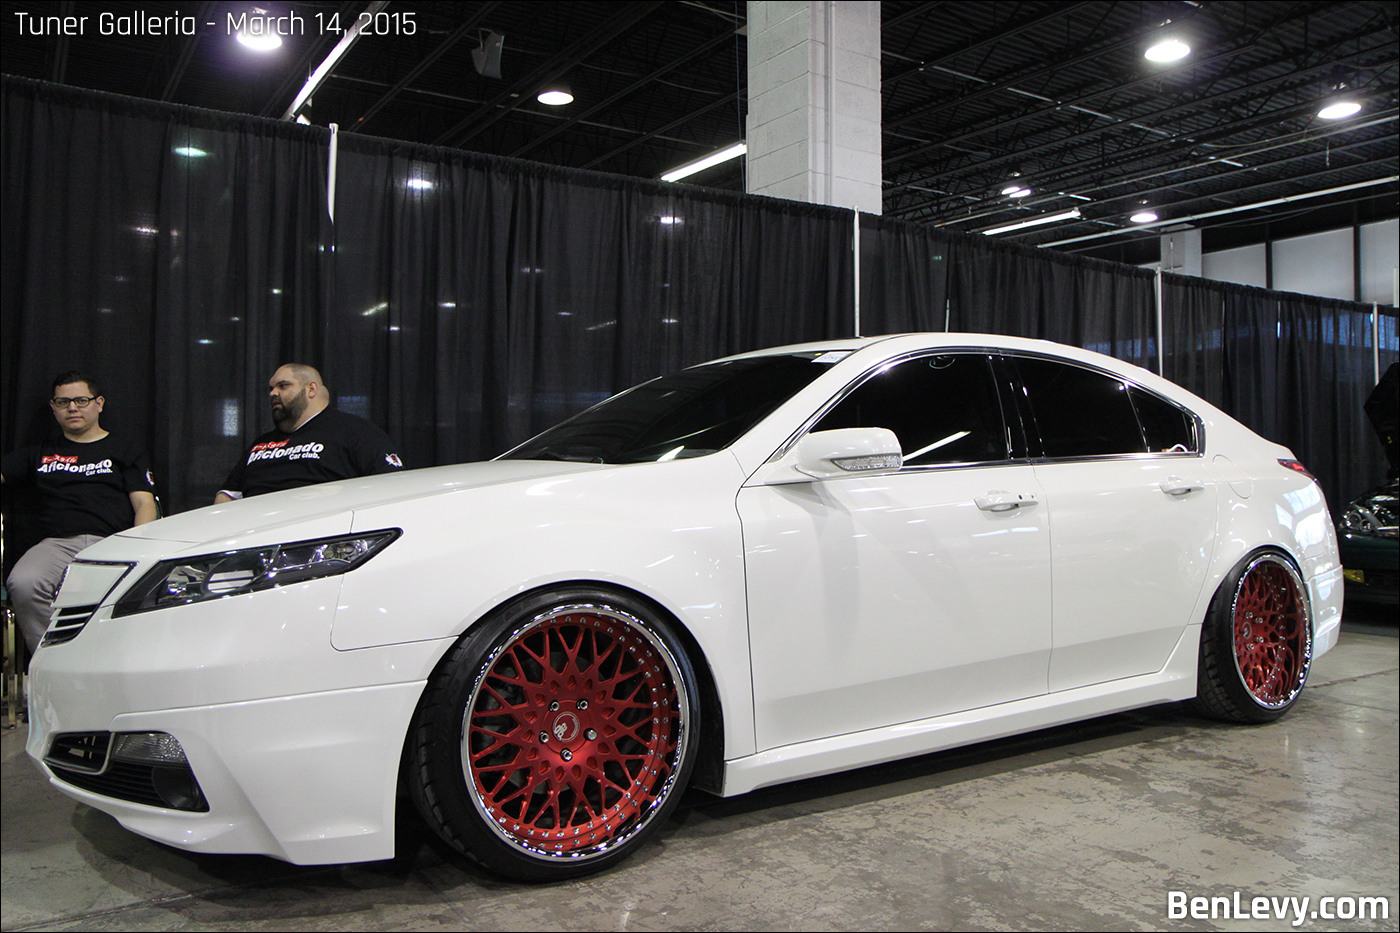 Acura TL with red wheels